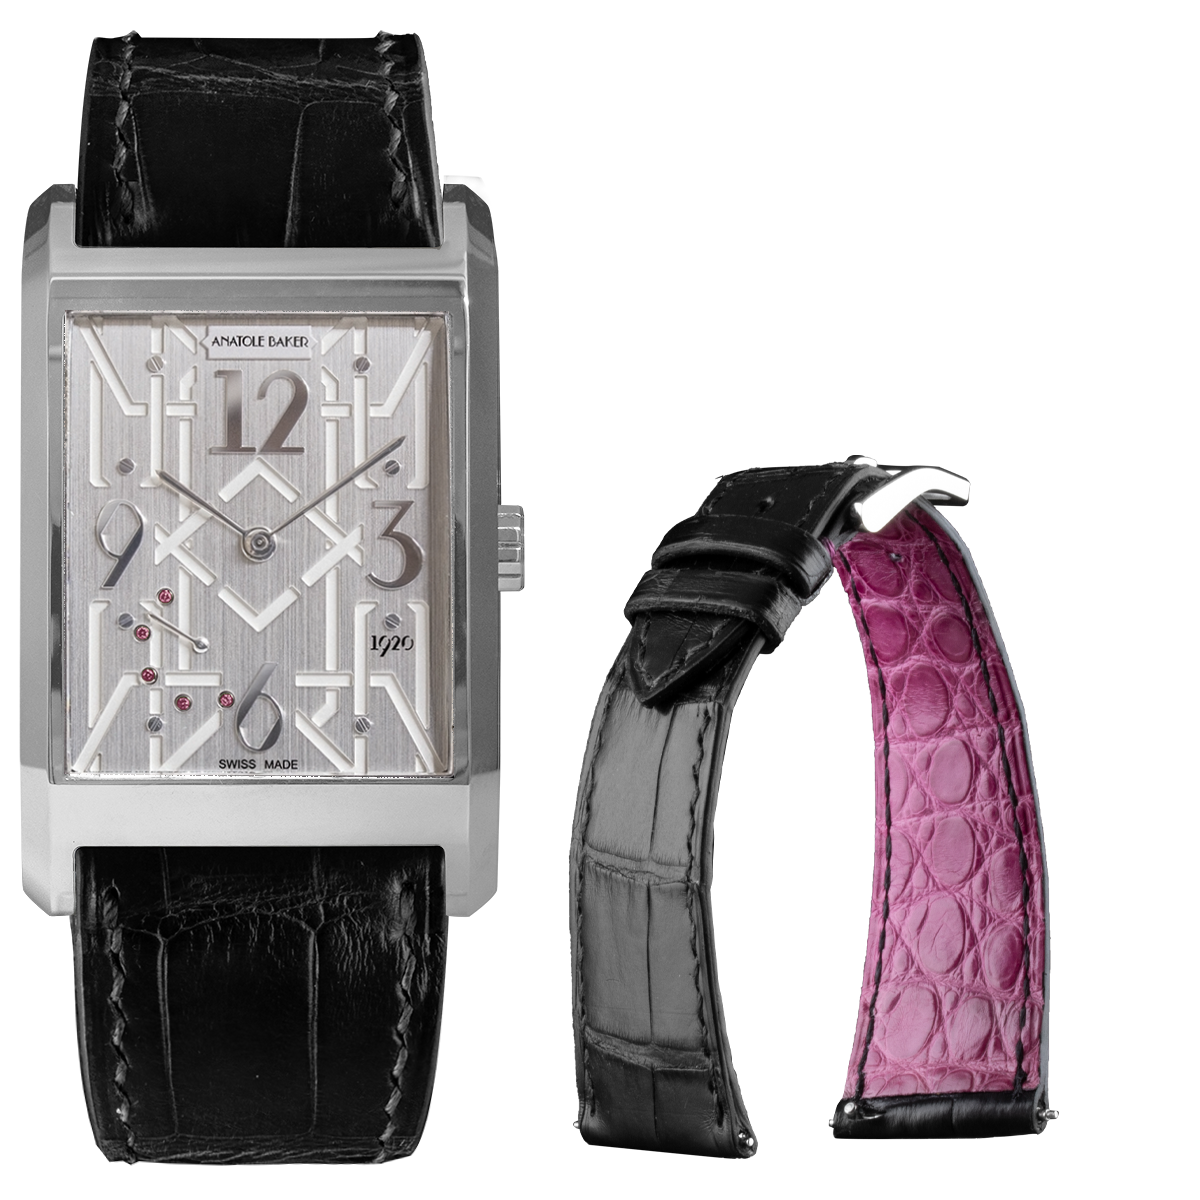 ANATOLE BAKER 1920 watch - Dandy pink rubies - Black alligator strap with pink lining